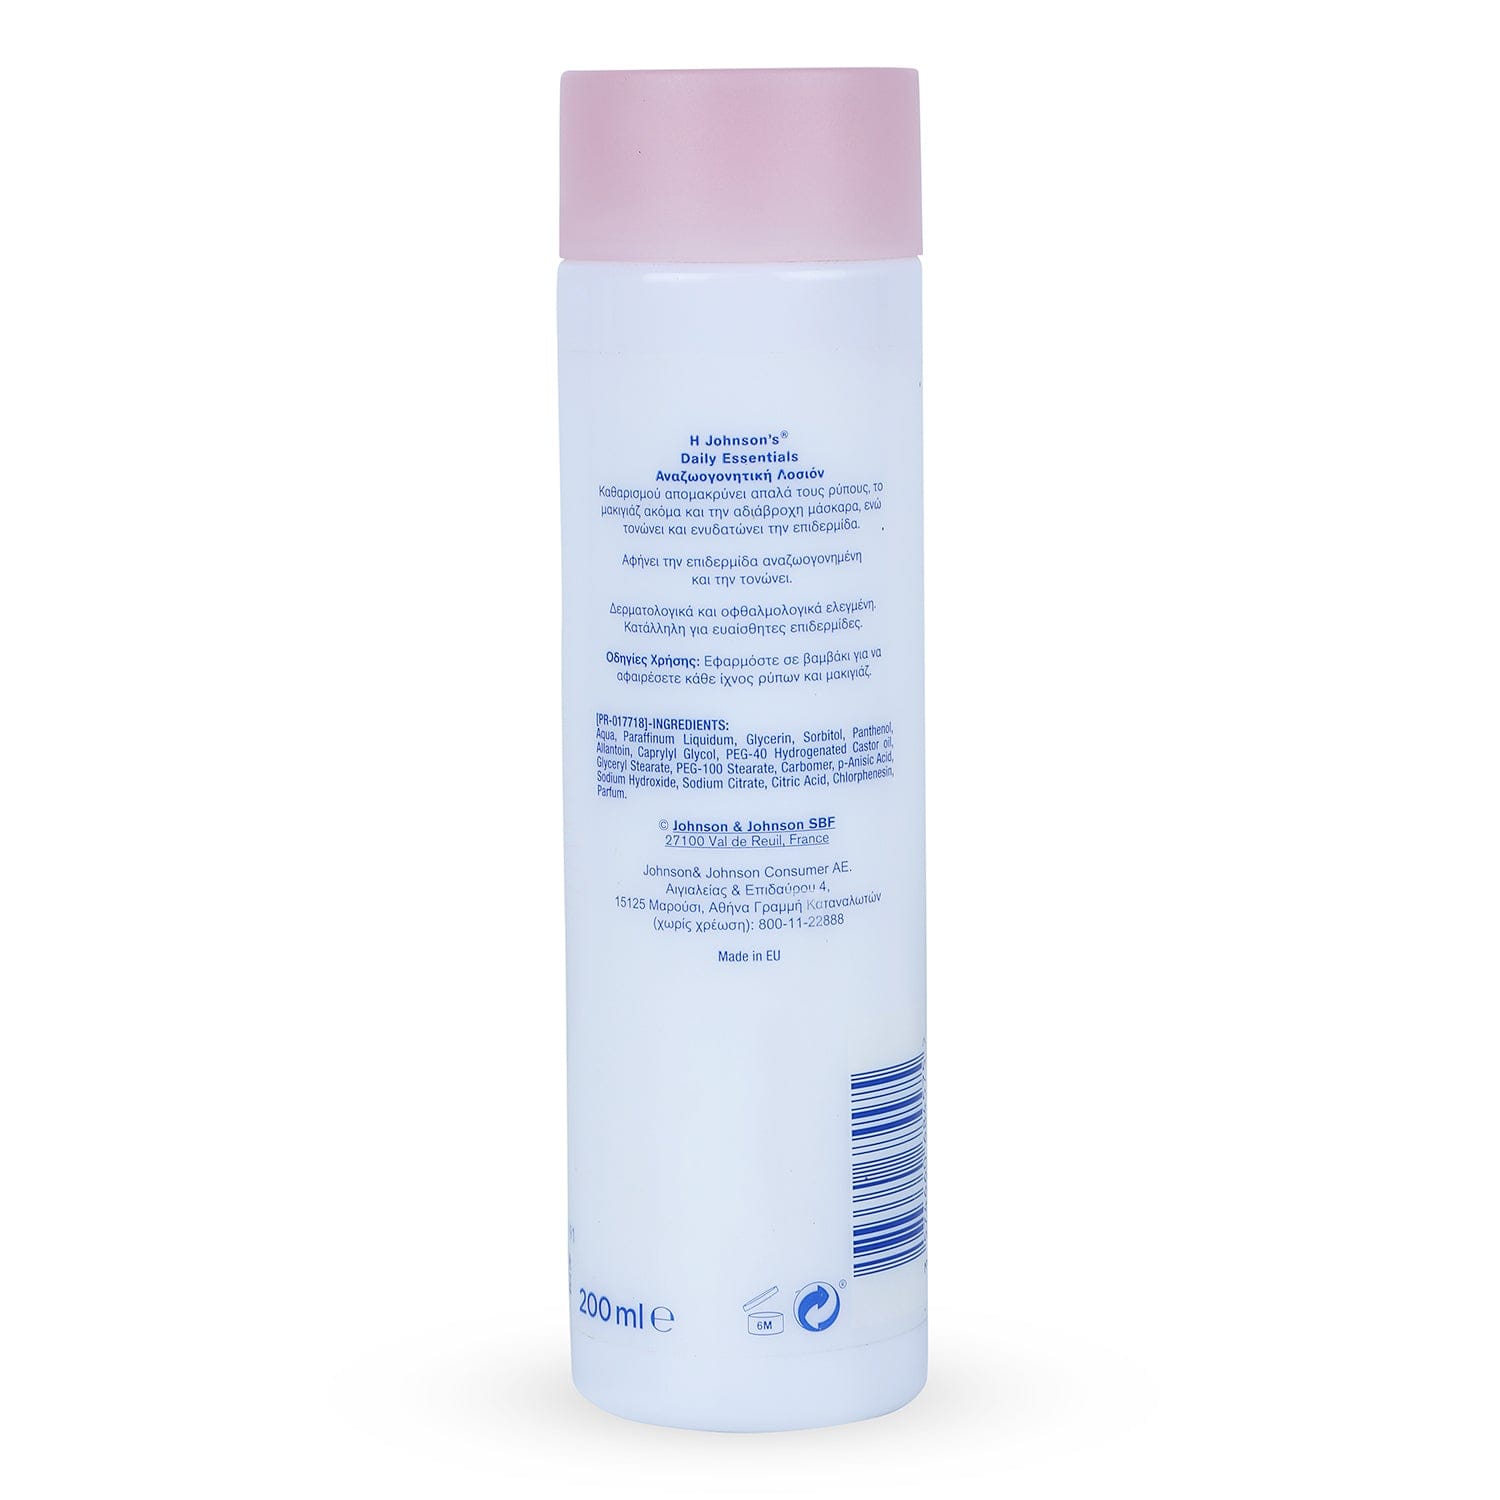 Johnson's Daily Essentials Refreshing Cleansing Lotion Makeup Remover - 200 ml - Baby Moo